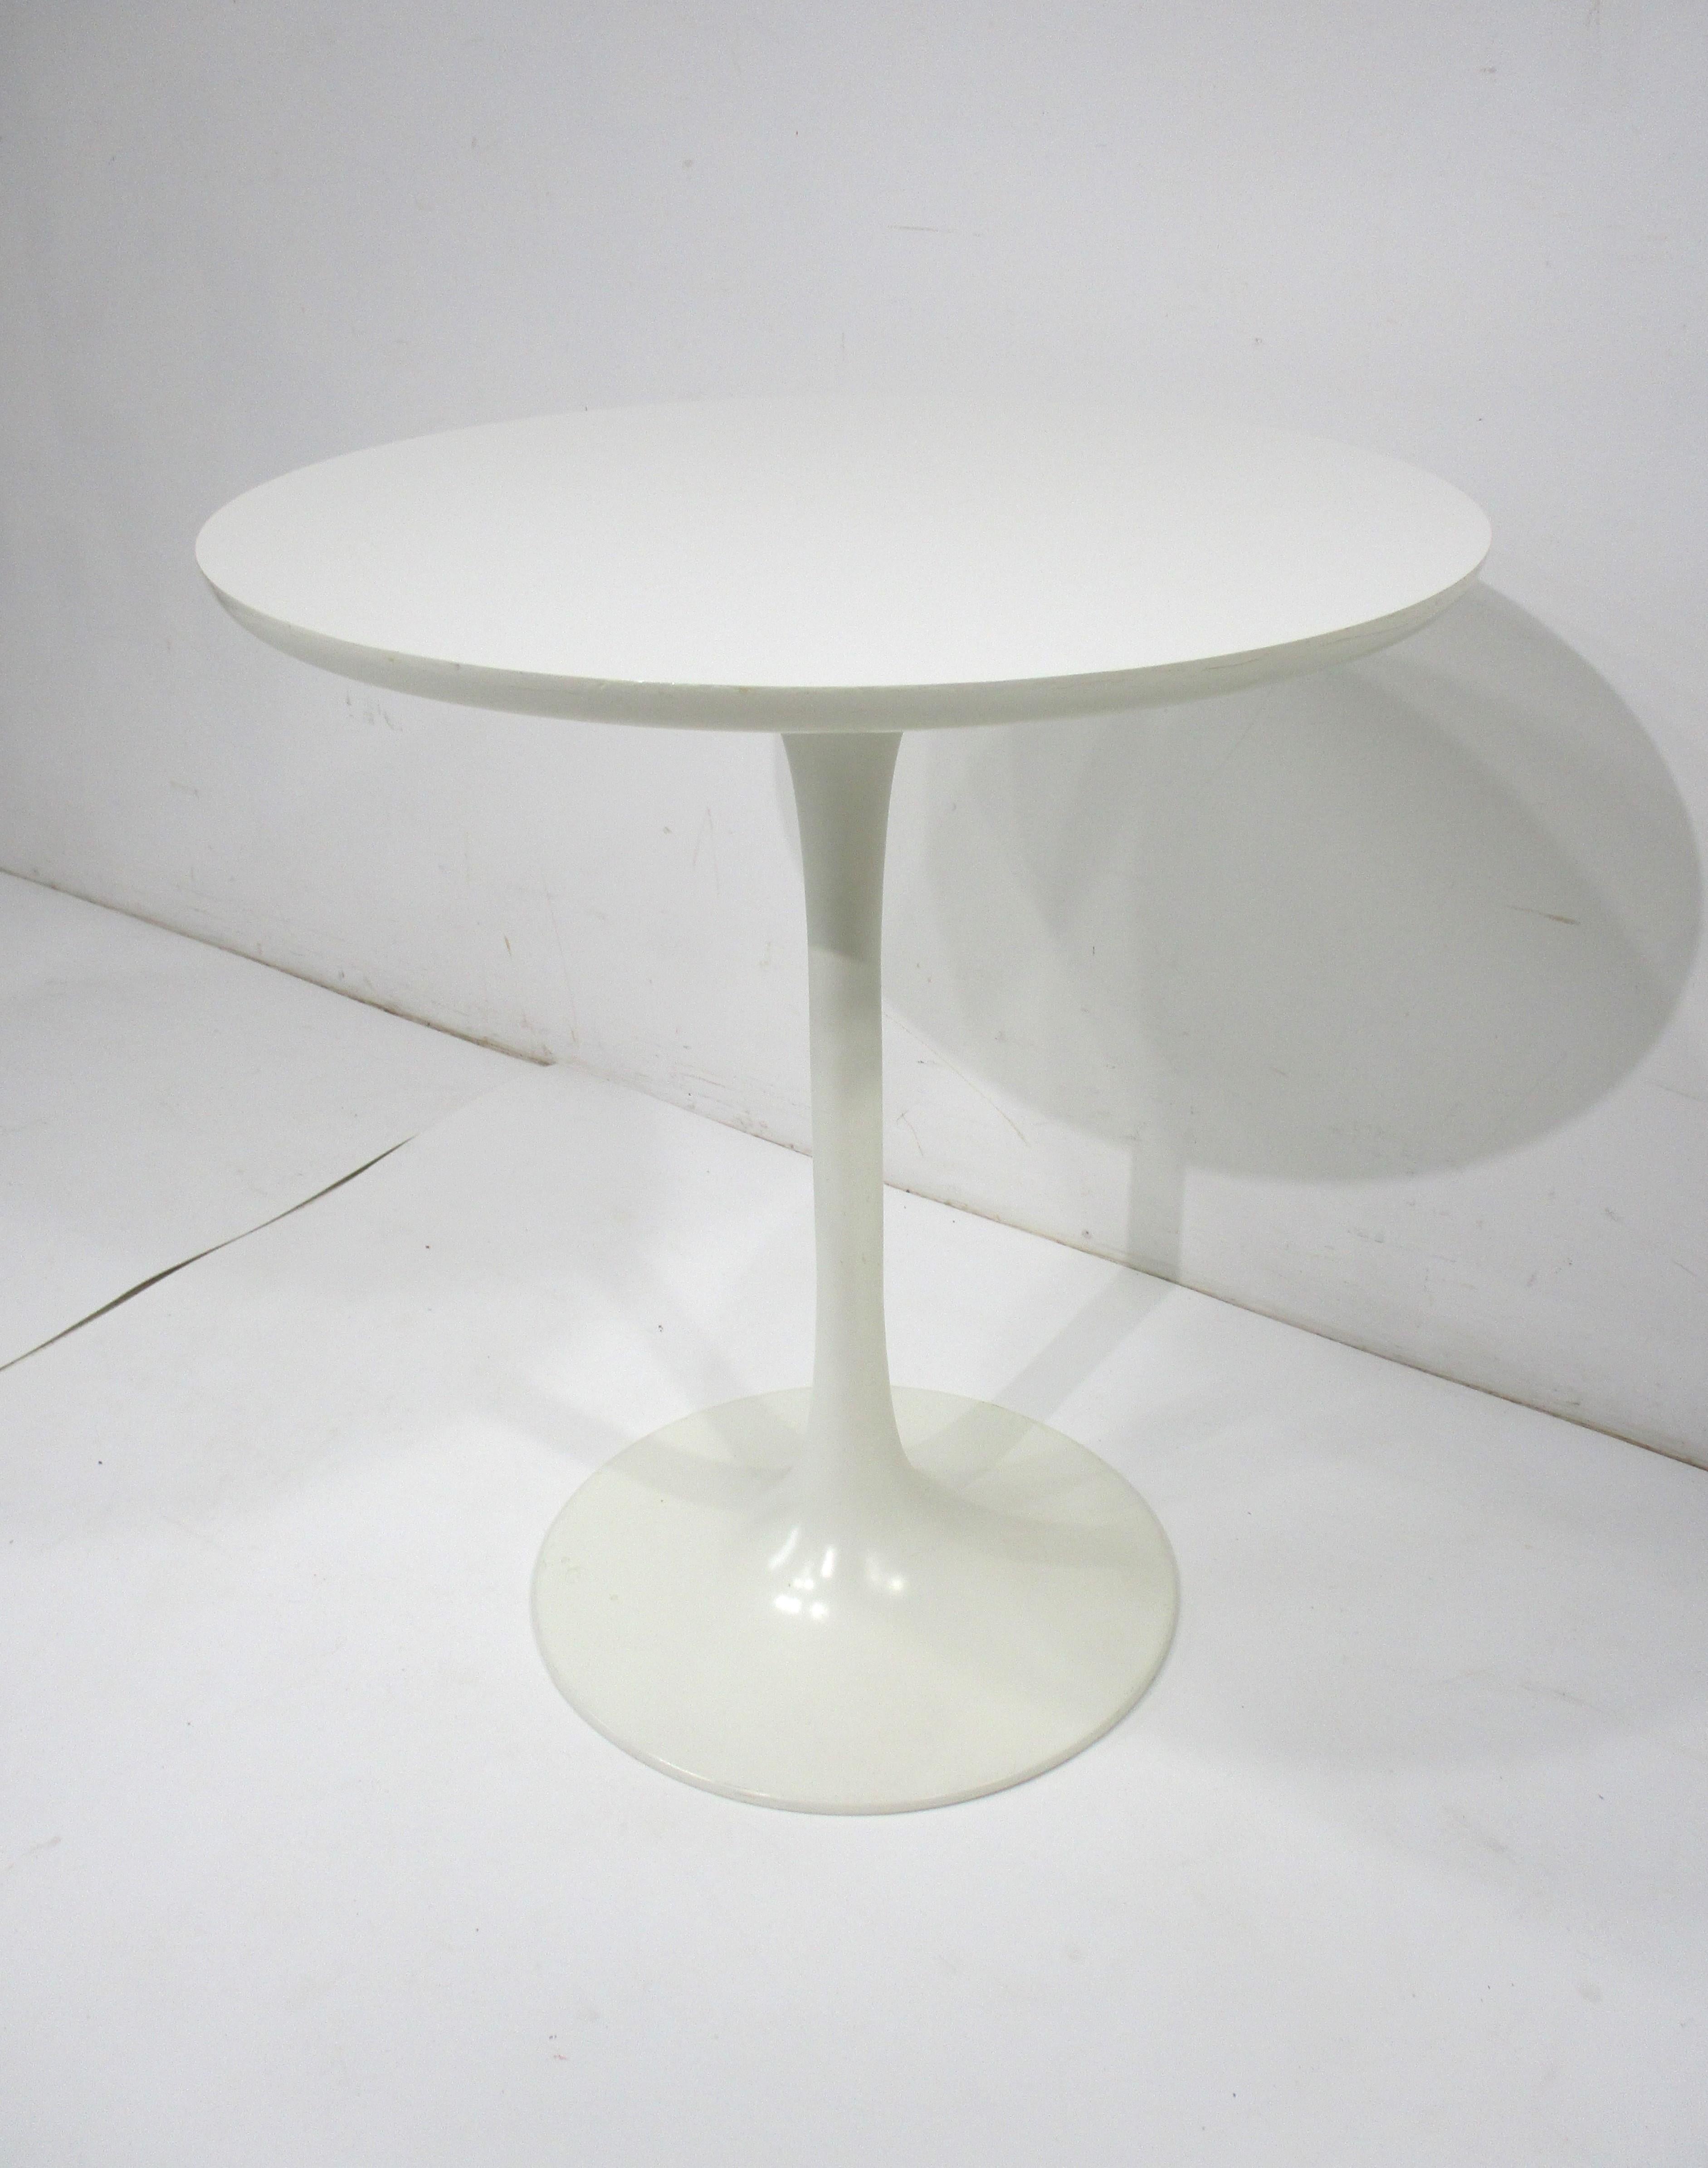 Taller Tulip Side / Lamp Table by Maurice Burke in the style of Saarinen  For Sale 1